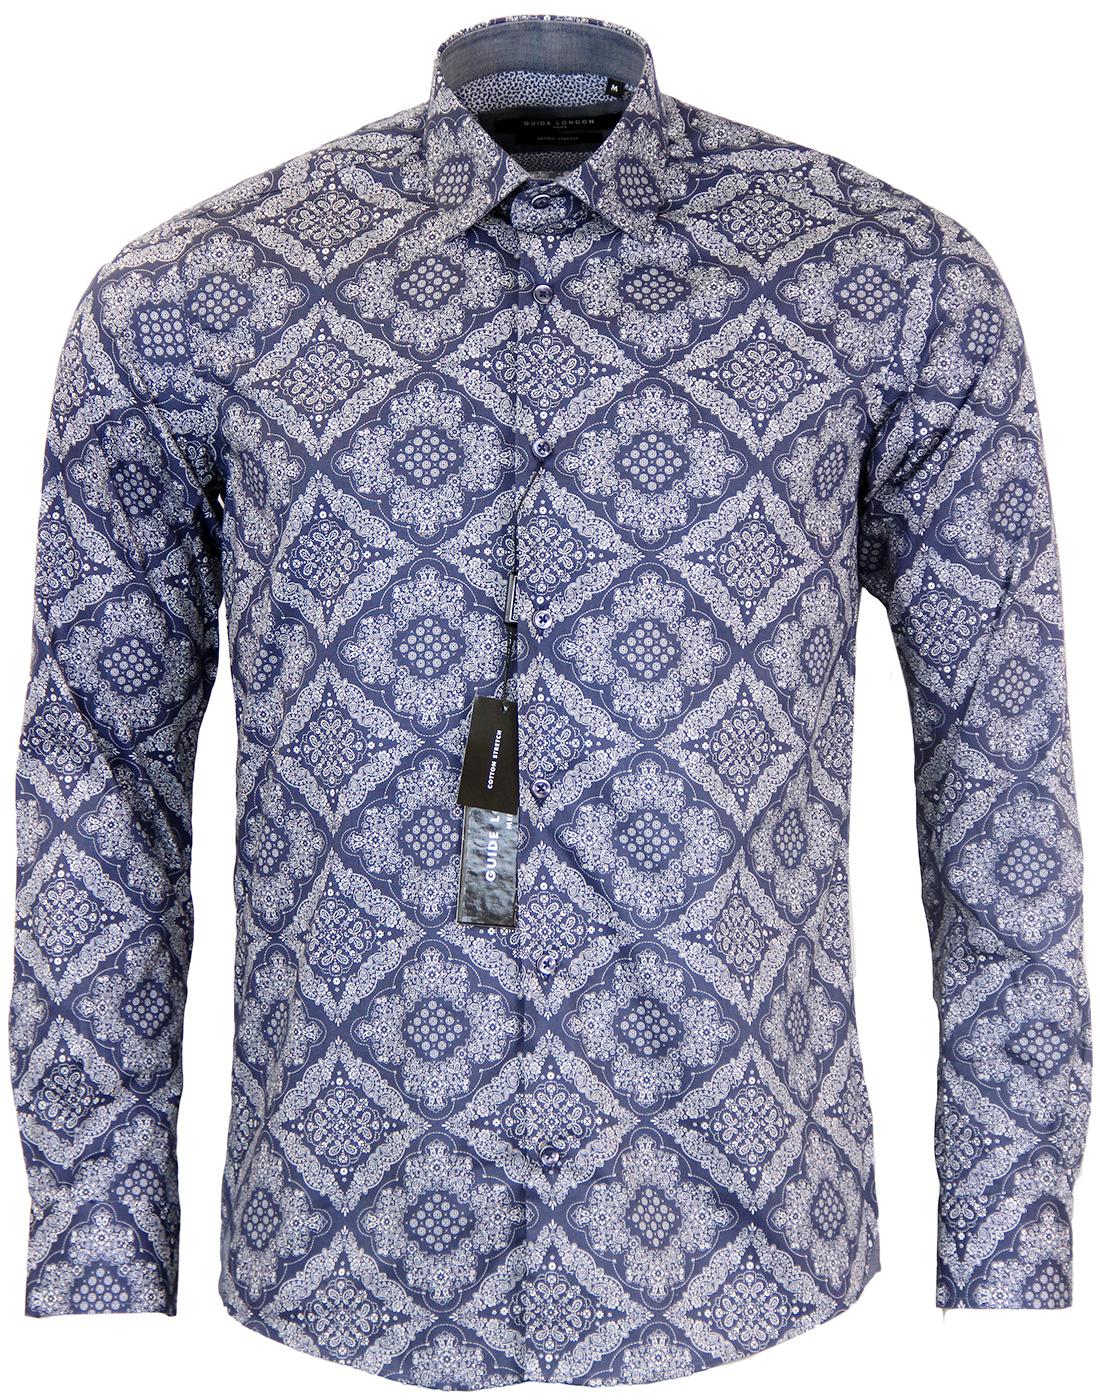 GUIDE LONDON Retro 60s Mod Persian Floral Paisley Shirt in Blue